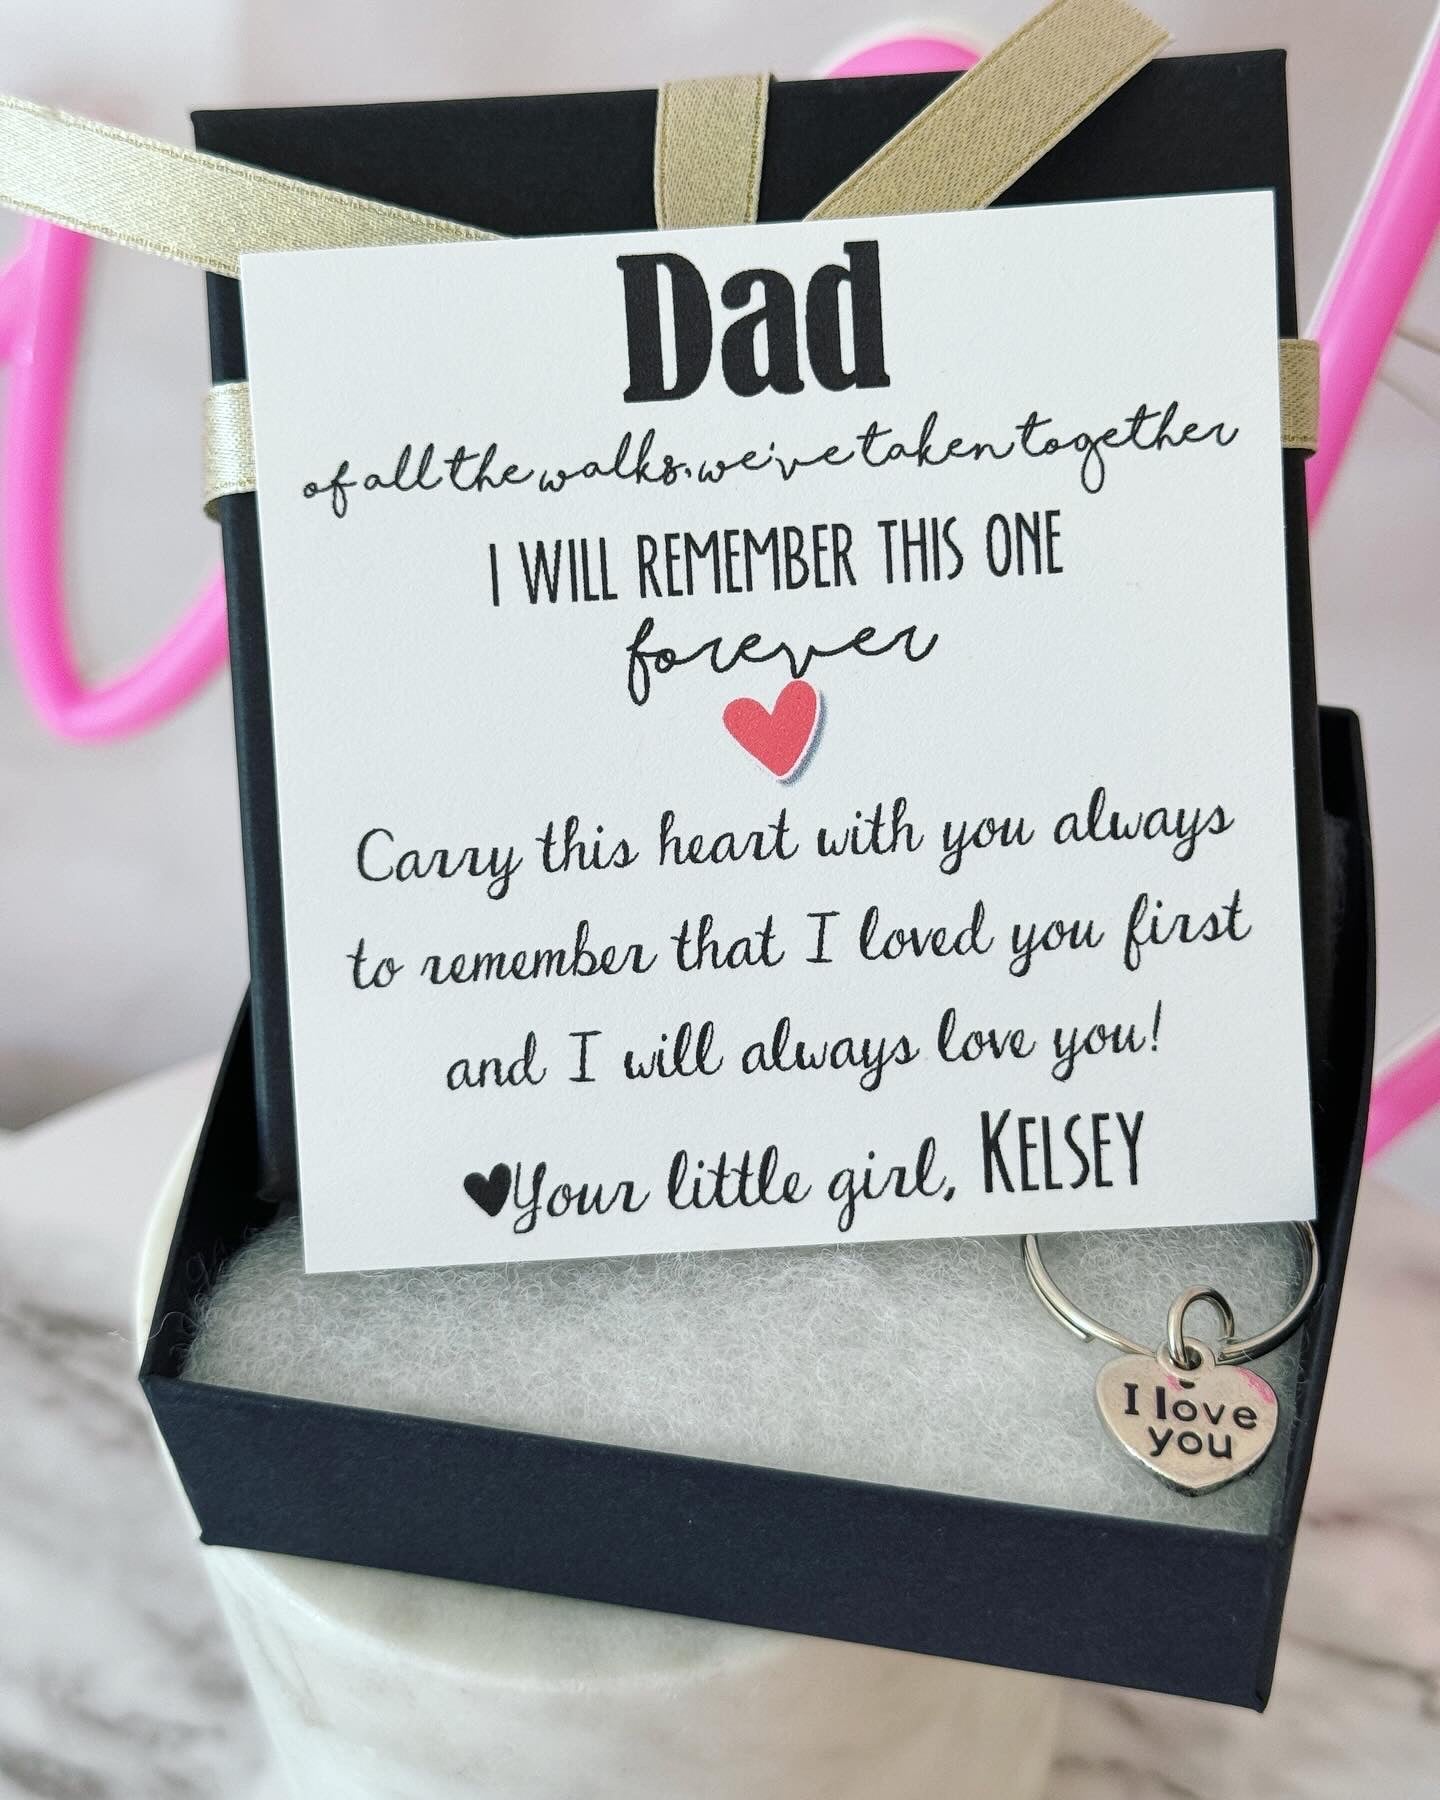 Father of the Bride gift "I love you" dainty heart Laser Engraved key chain, Father daughter gift, card, box & ribbon included